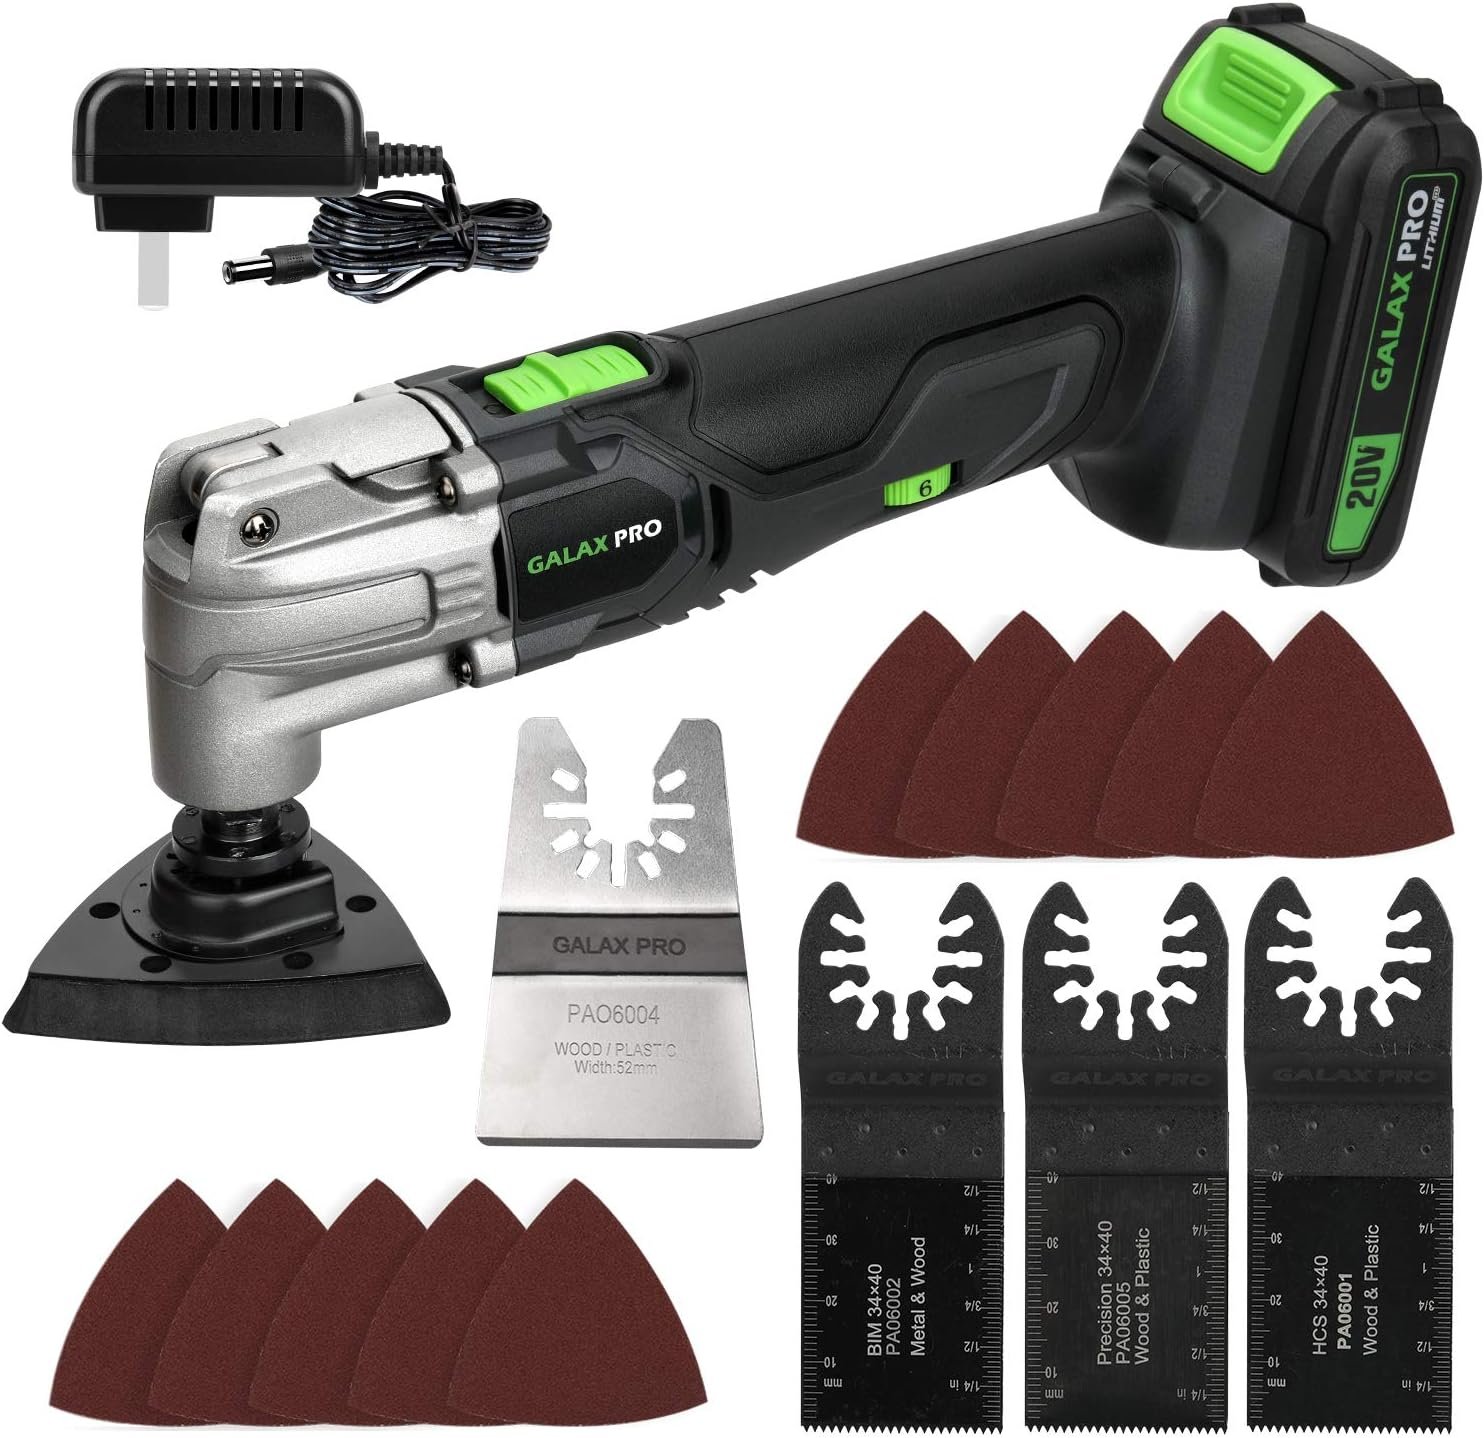 GALAX PRO Oscillating Tool Review